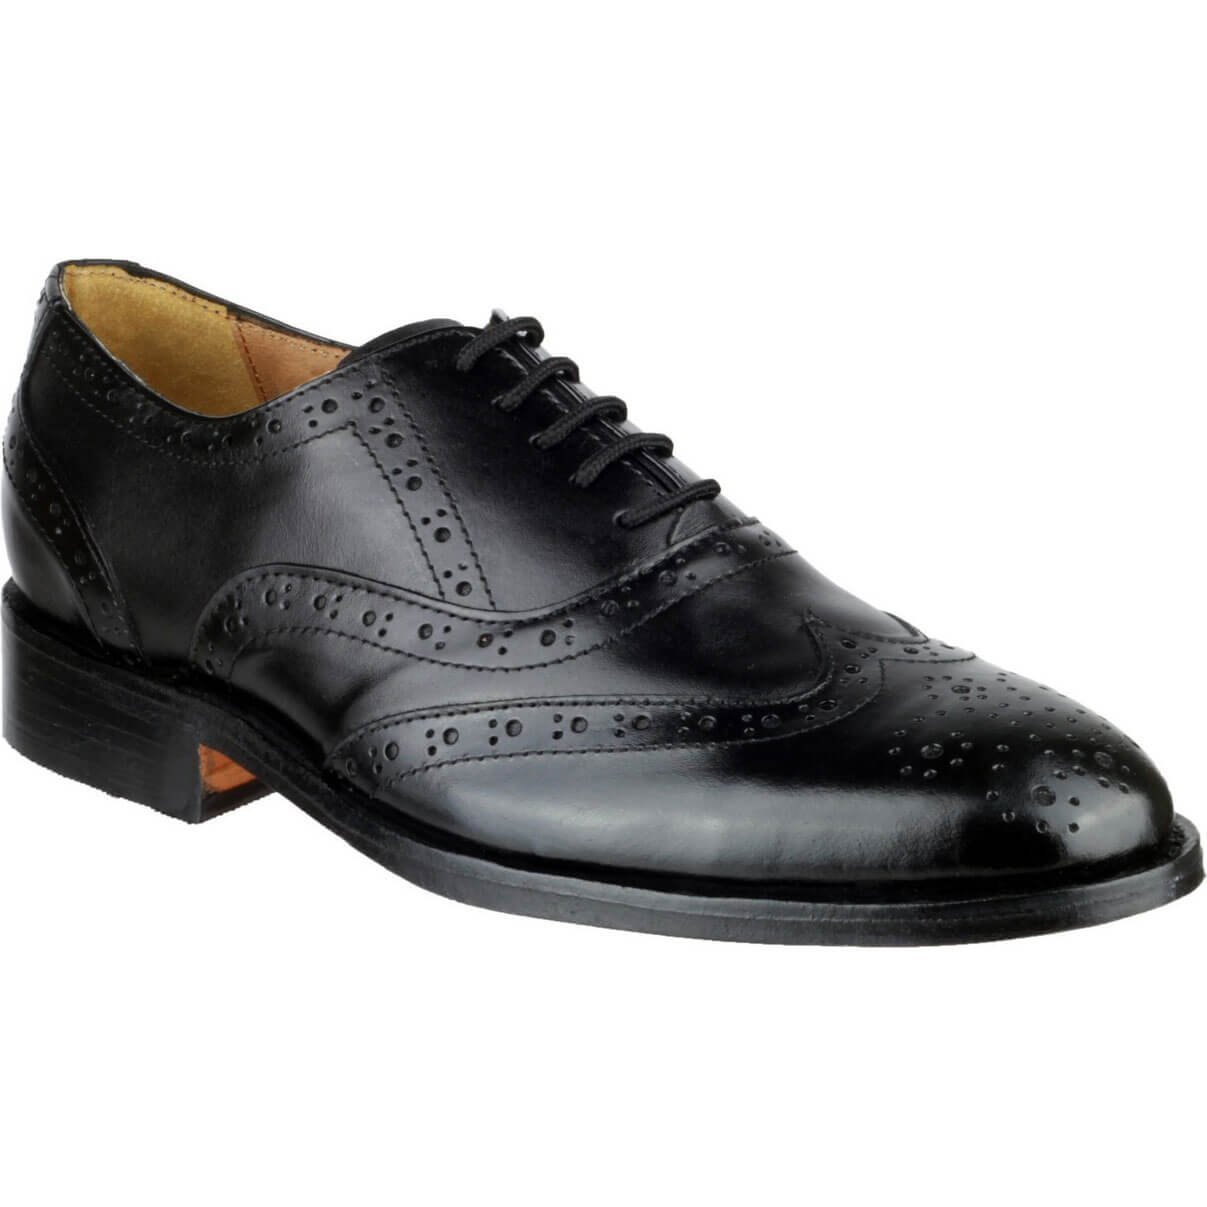 Image of Amblers Ben Leather Soled Oxford Brogue Black Size 8